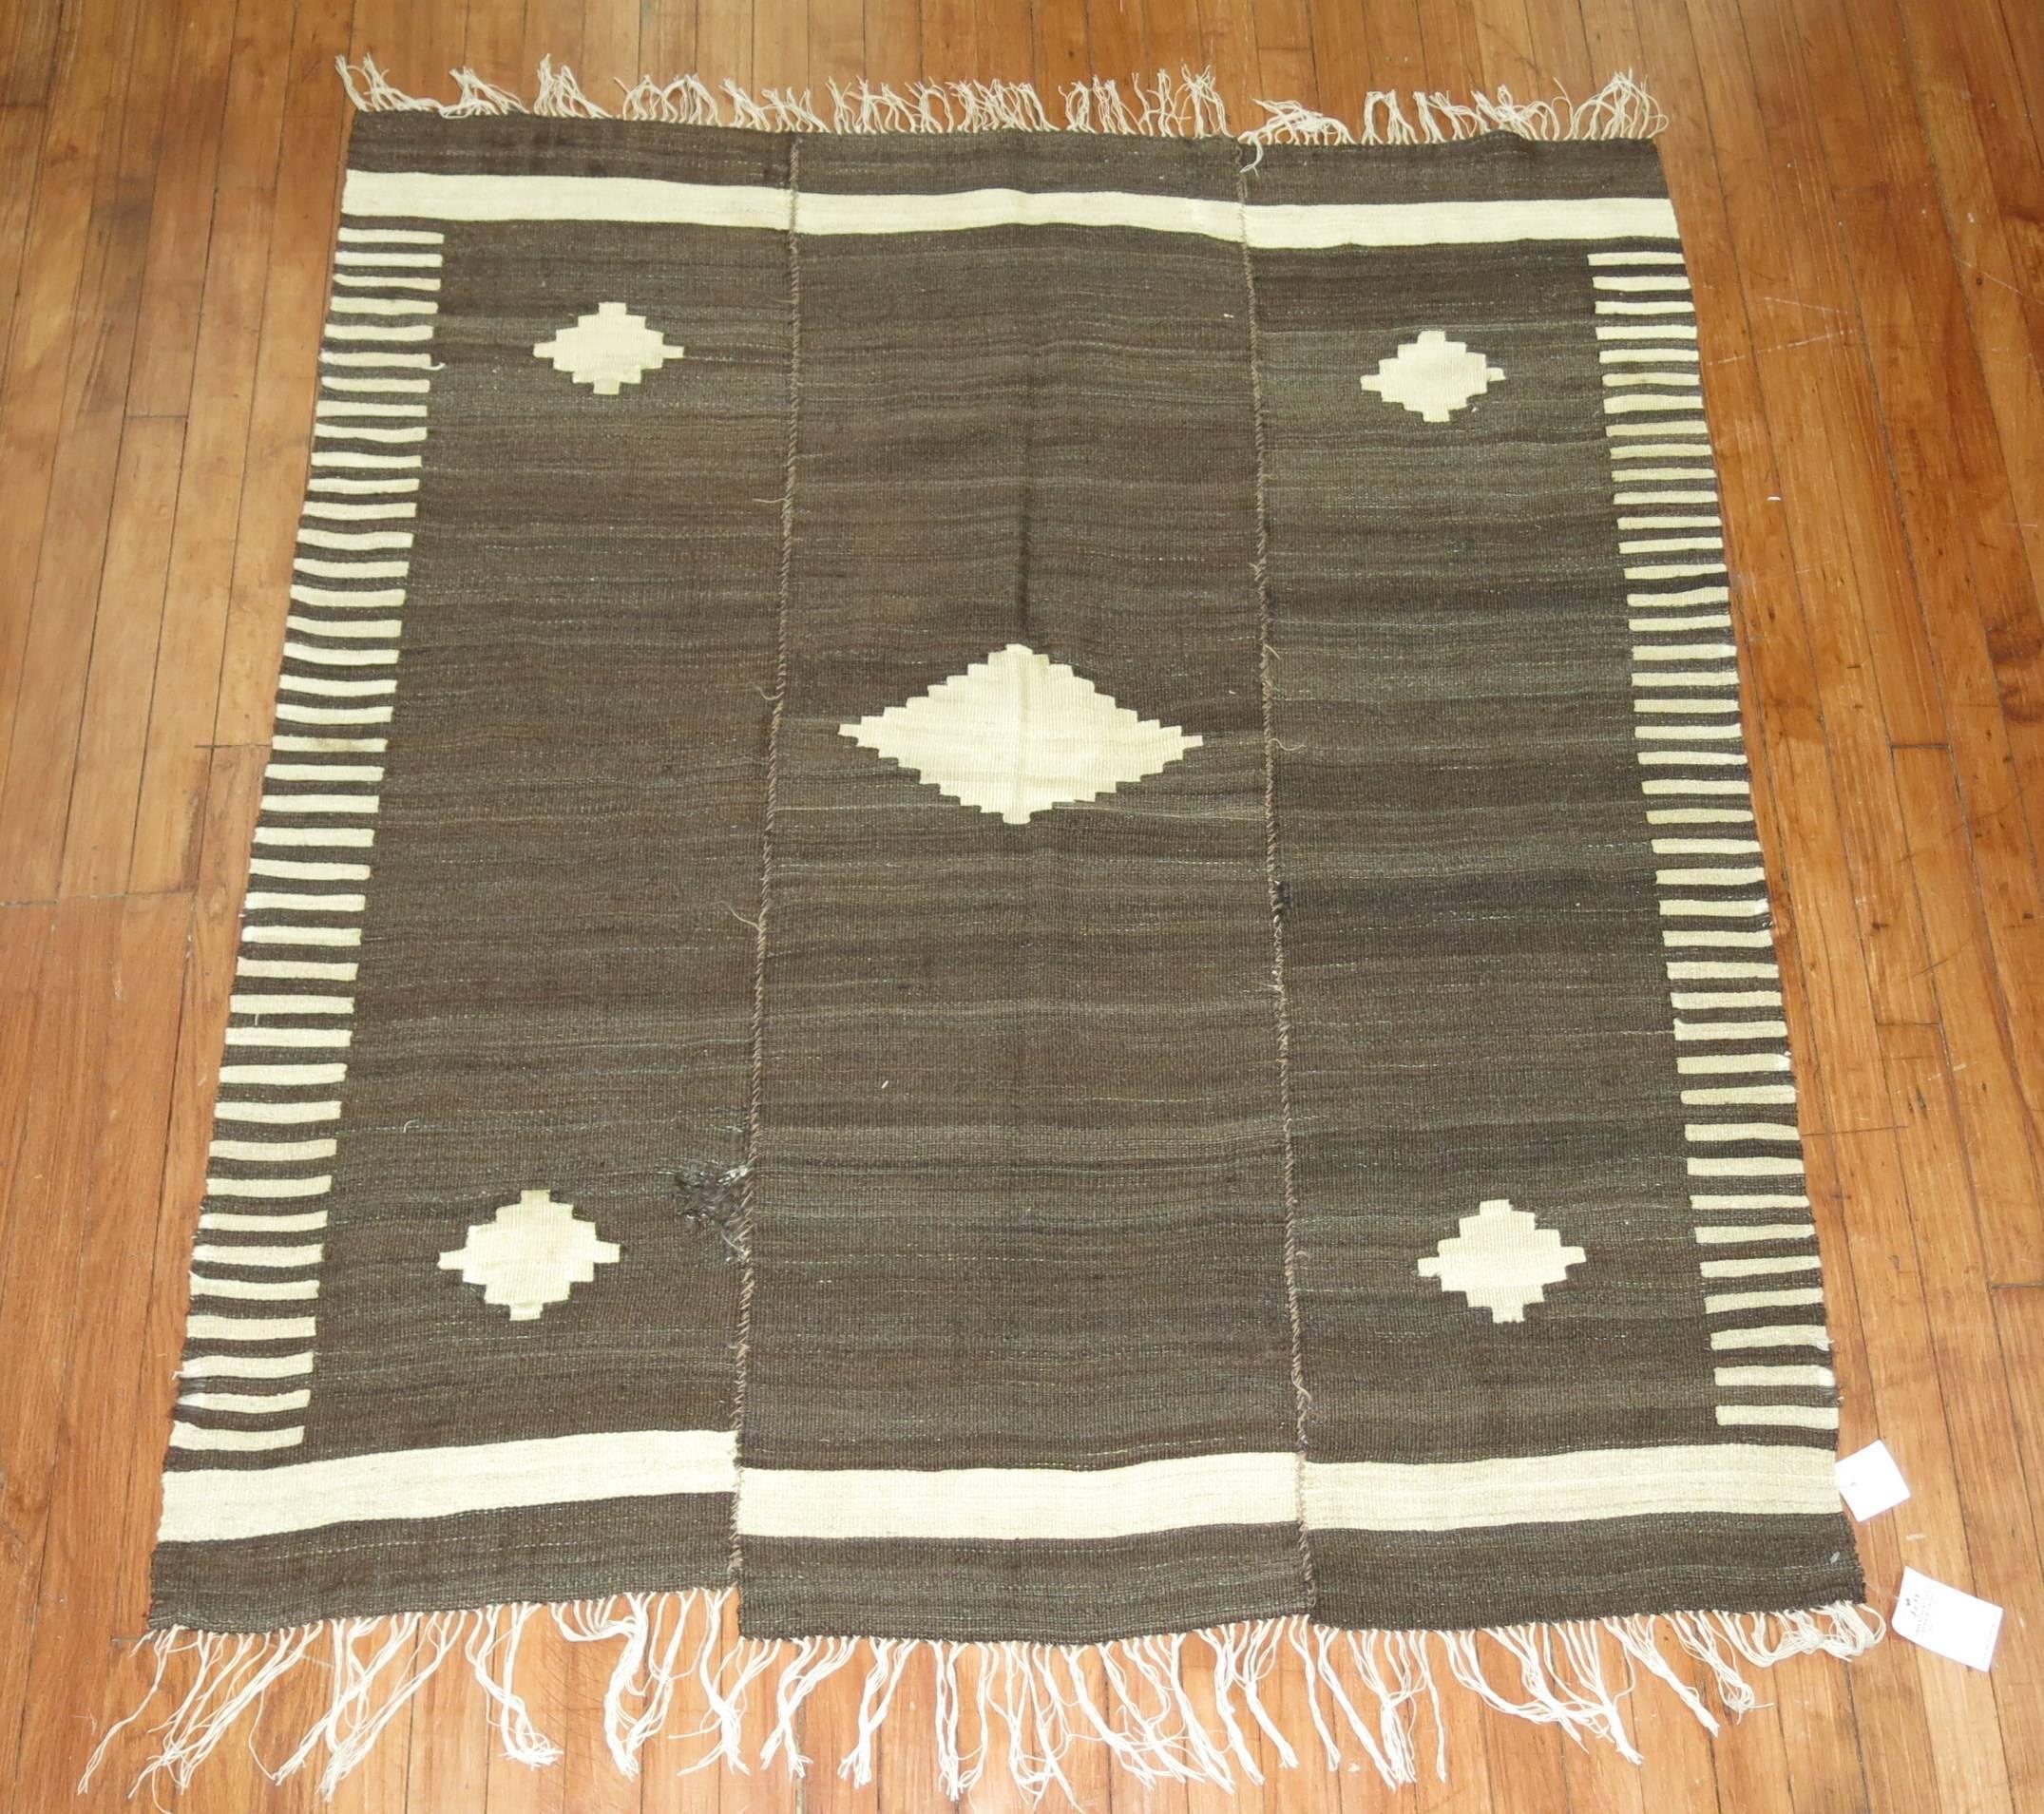 A turkish Kilim woven in 3 woven Panels. The left end intentionally woven shorter in length than the other 2 strips. Can be uses as a throw piece too.